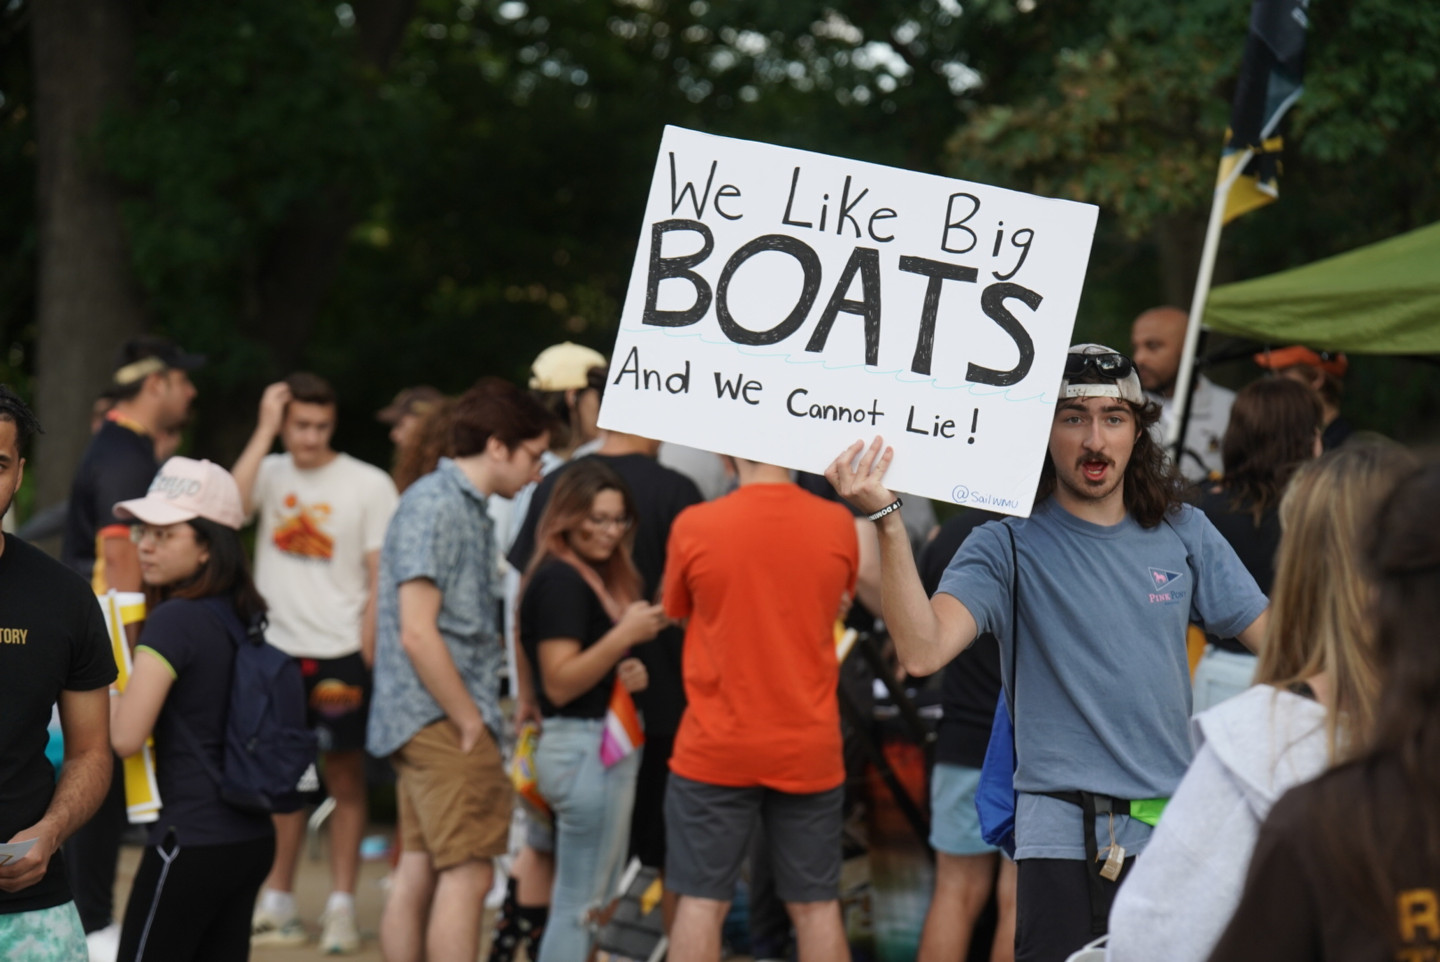 A student carries a sign that says, "We like big boats and we cannot lie!"